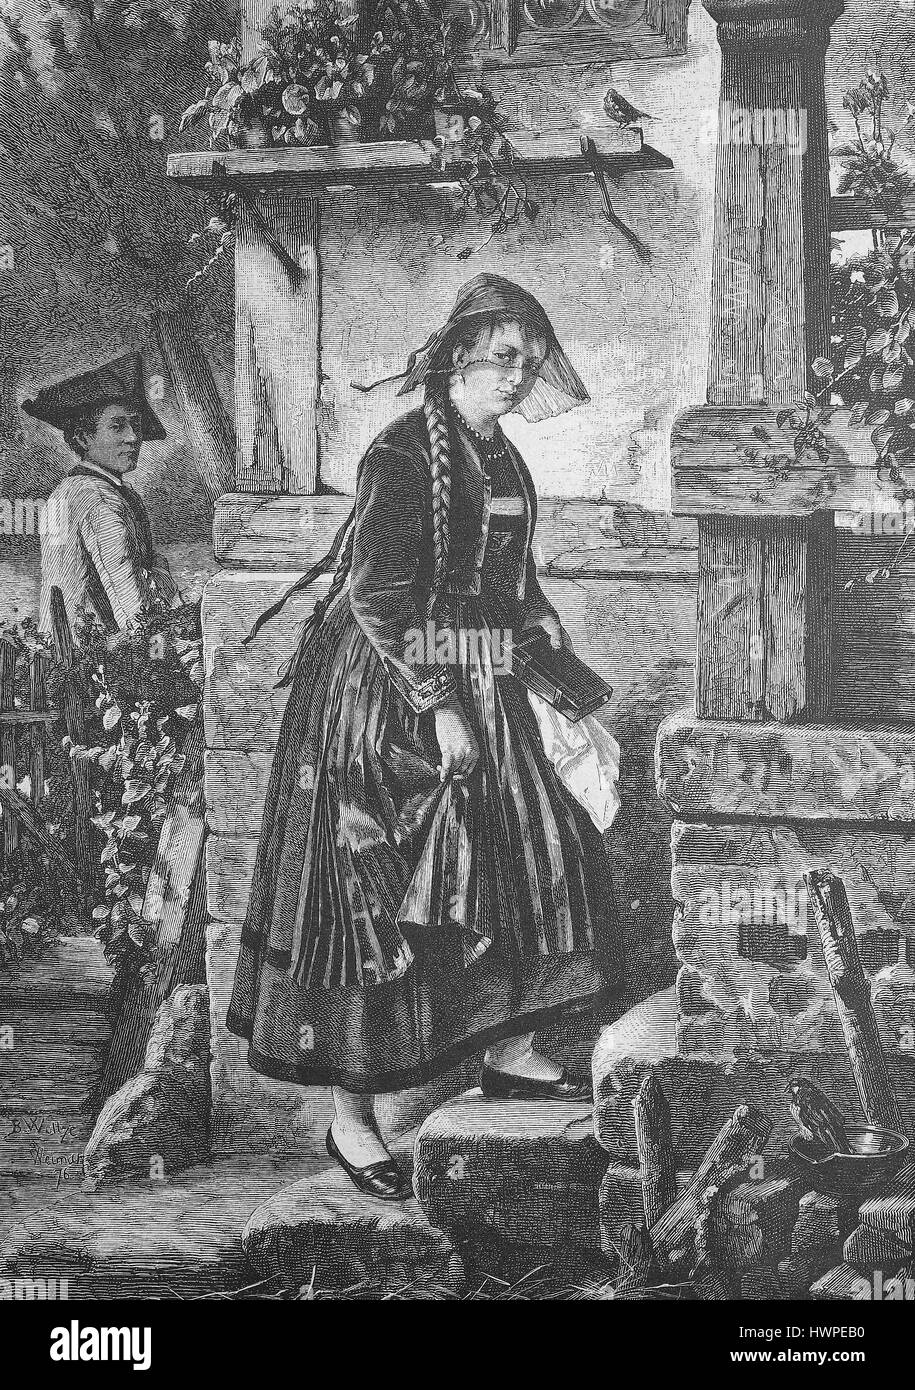 Return from Church, woman in costume, with a hymn book in hand, on the way home from the church service, Germany, Reproduction of an original woodcut from the year 1882, digital improved Stock Photo